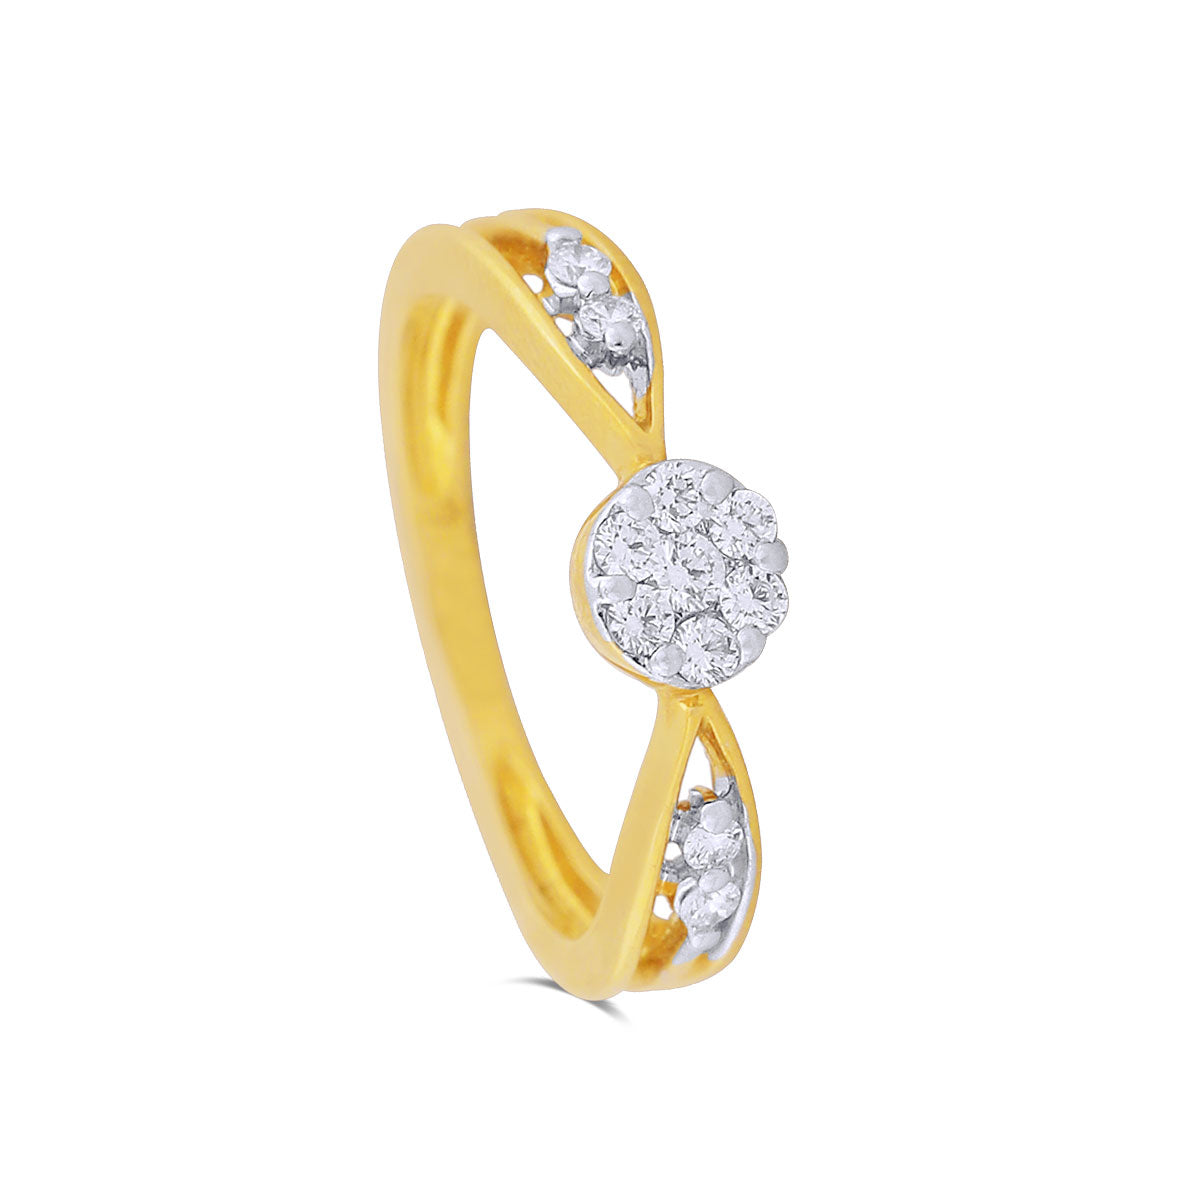 Buy Gleaming Textured Gold Ring for Men at Best Price | Tanishq UAE